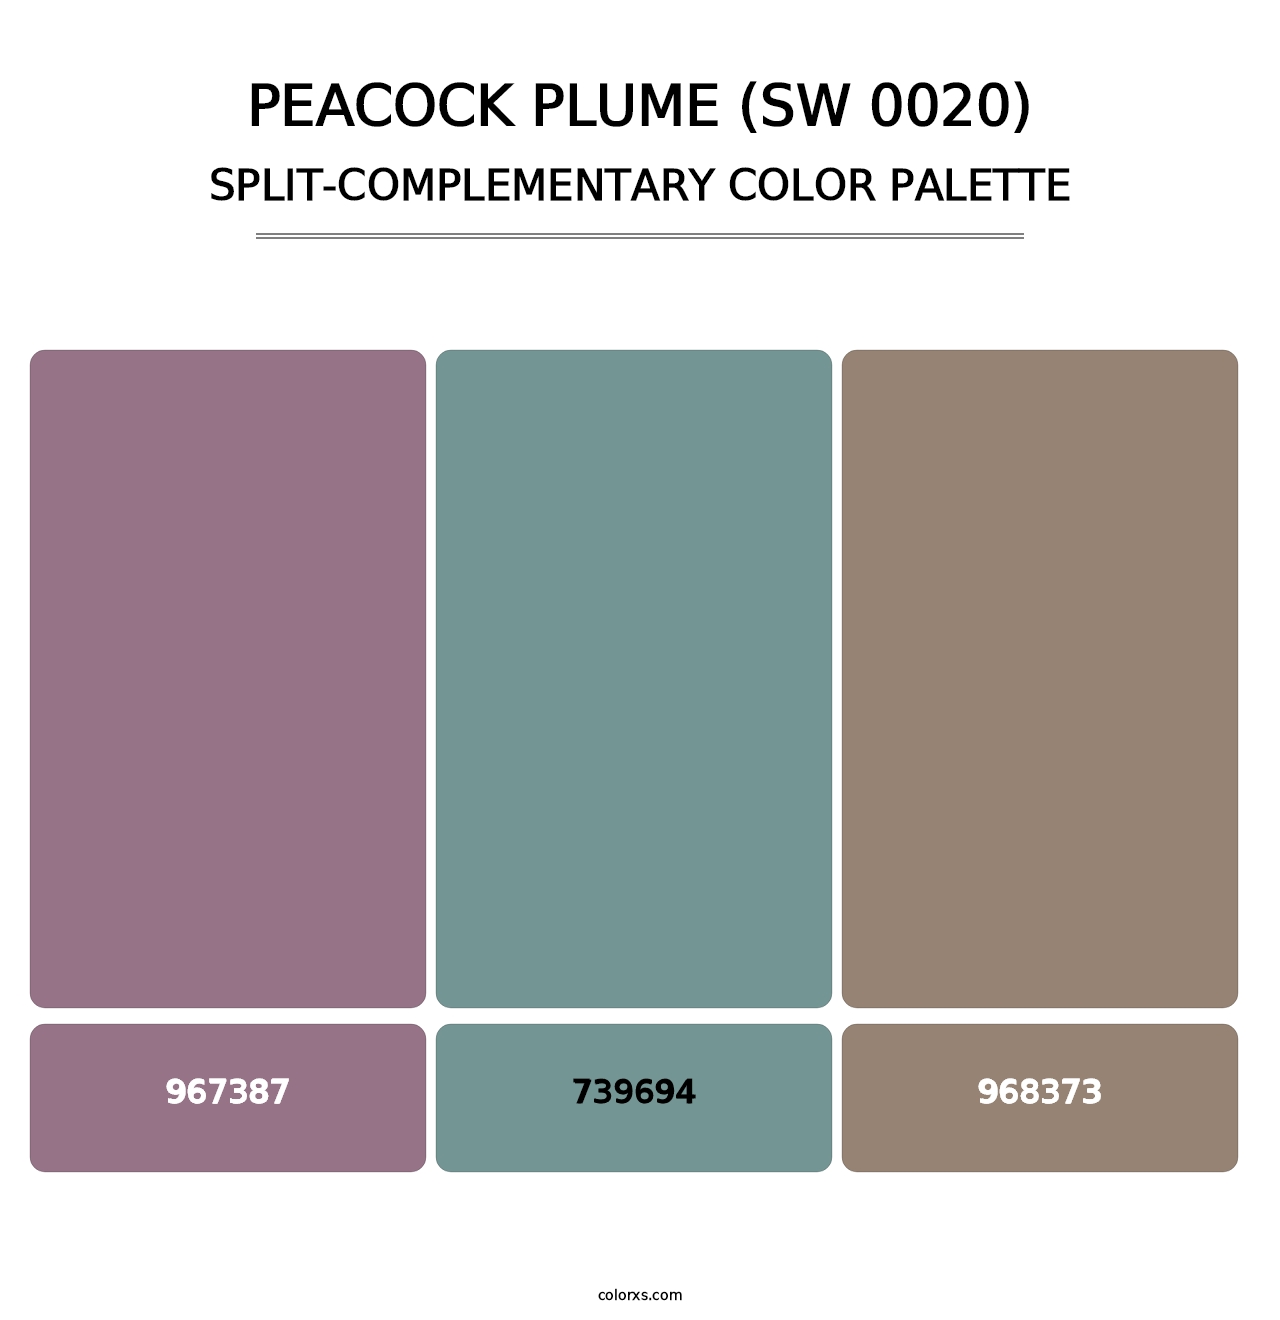 Peacock Plume (SW 0020) - Split-Complementary Color Palette